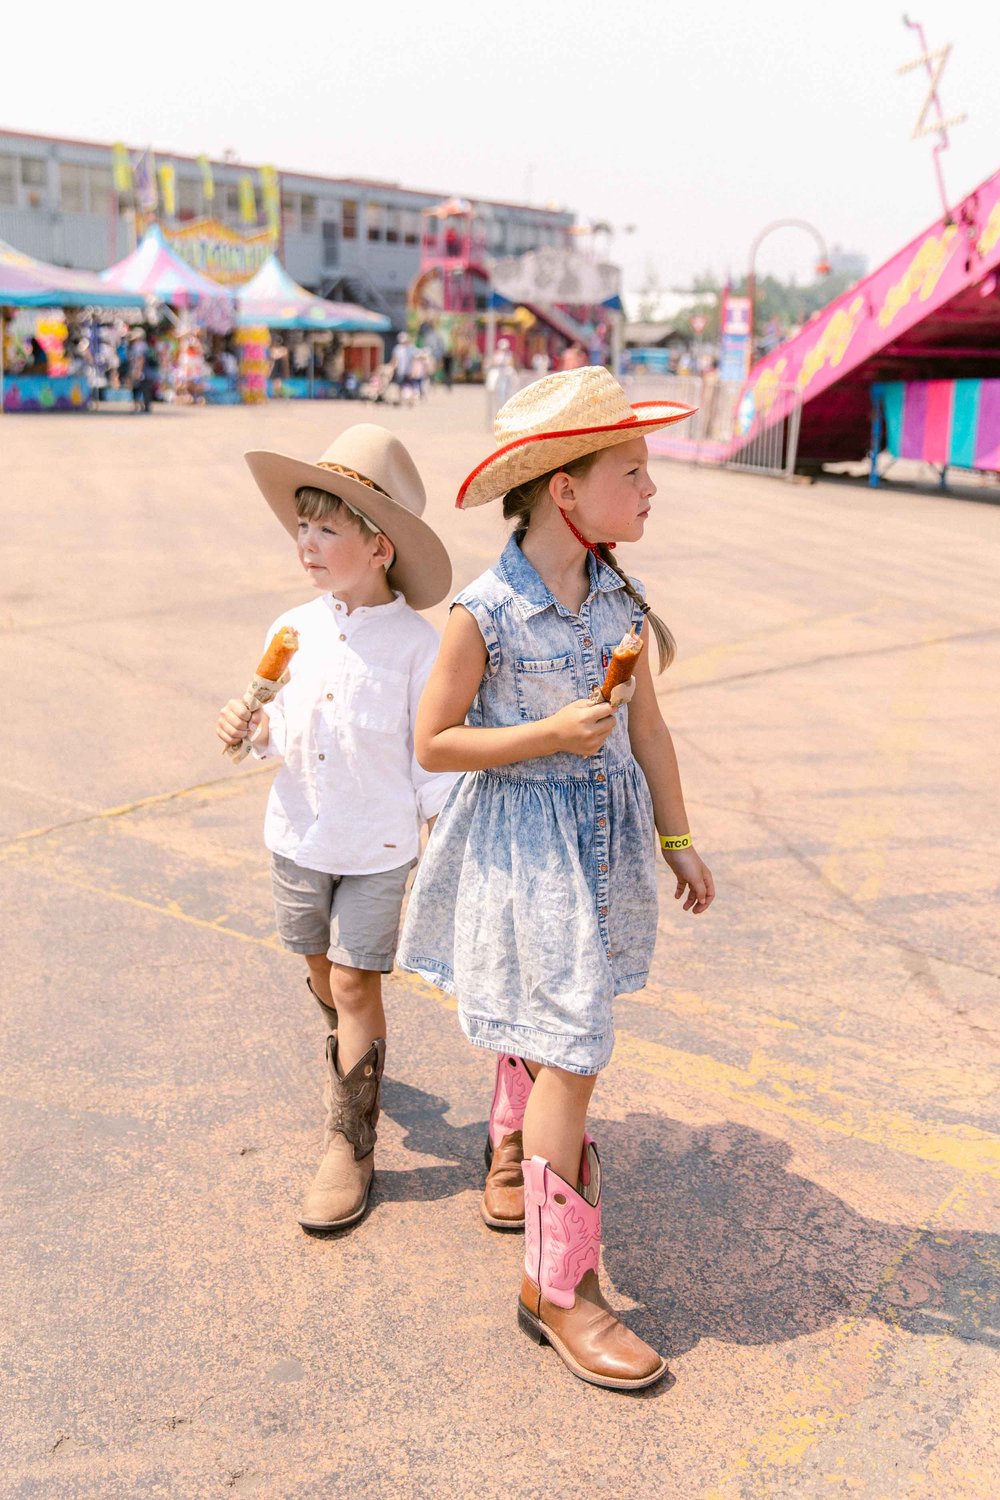 Best Food at the Stampede Calgary Stampede 10 Best Place to Take Instagrammable Photos